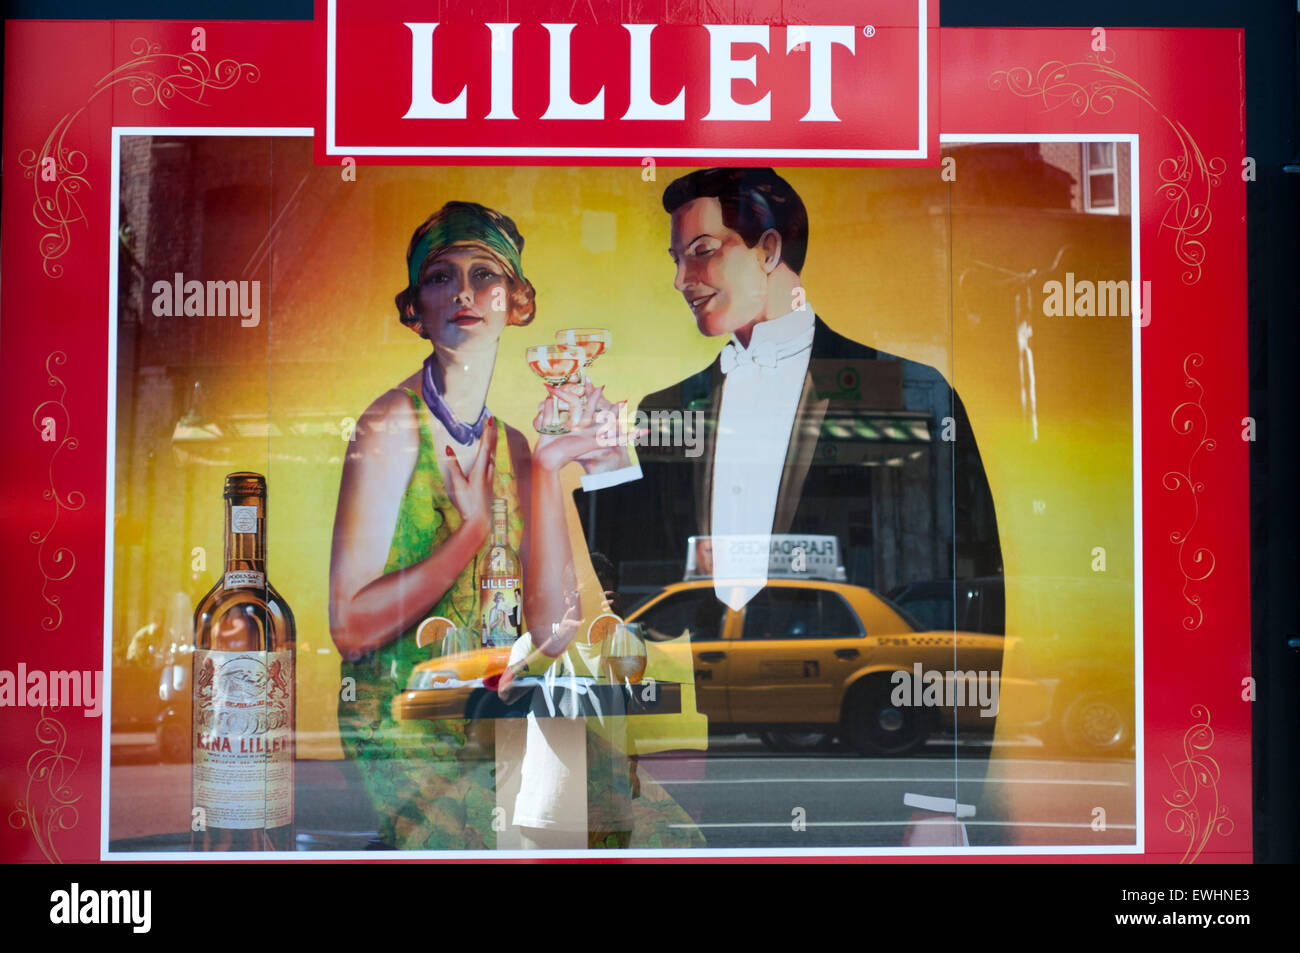 Kina Lillet advertising in New York city. Original advert from 1950s advertising LILLET aperitif alcohol drink in New York city. Kina Lillet 1904 poster for the French aperitif the white wine based tonic from the Gironde Stock Photo